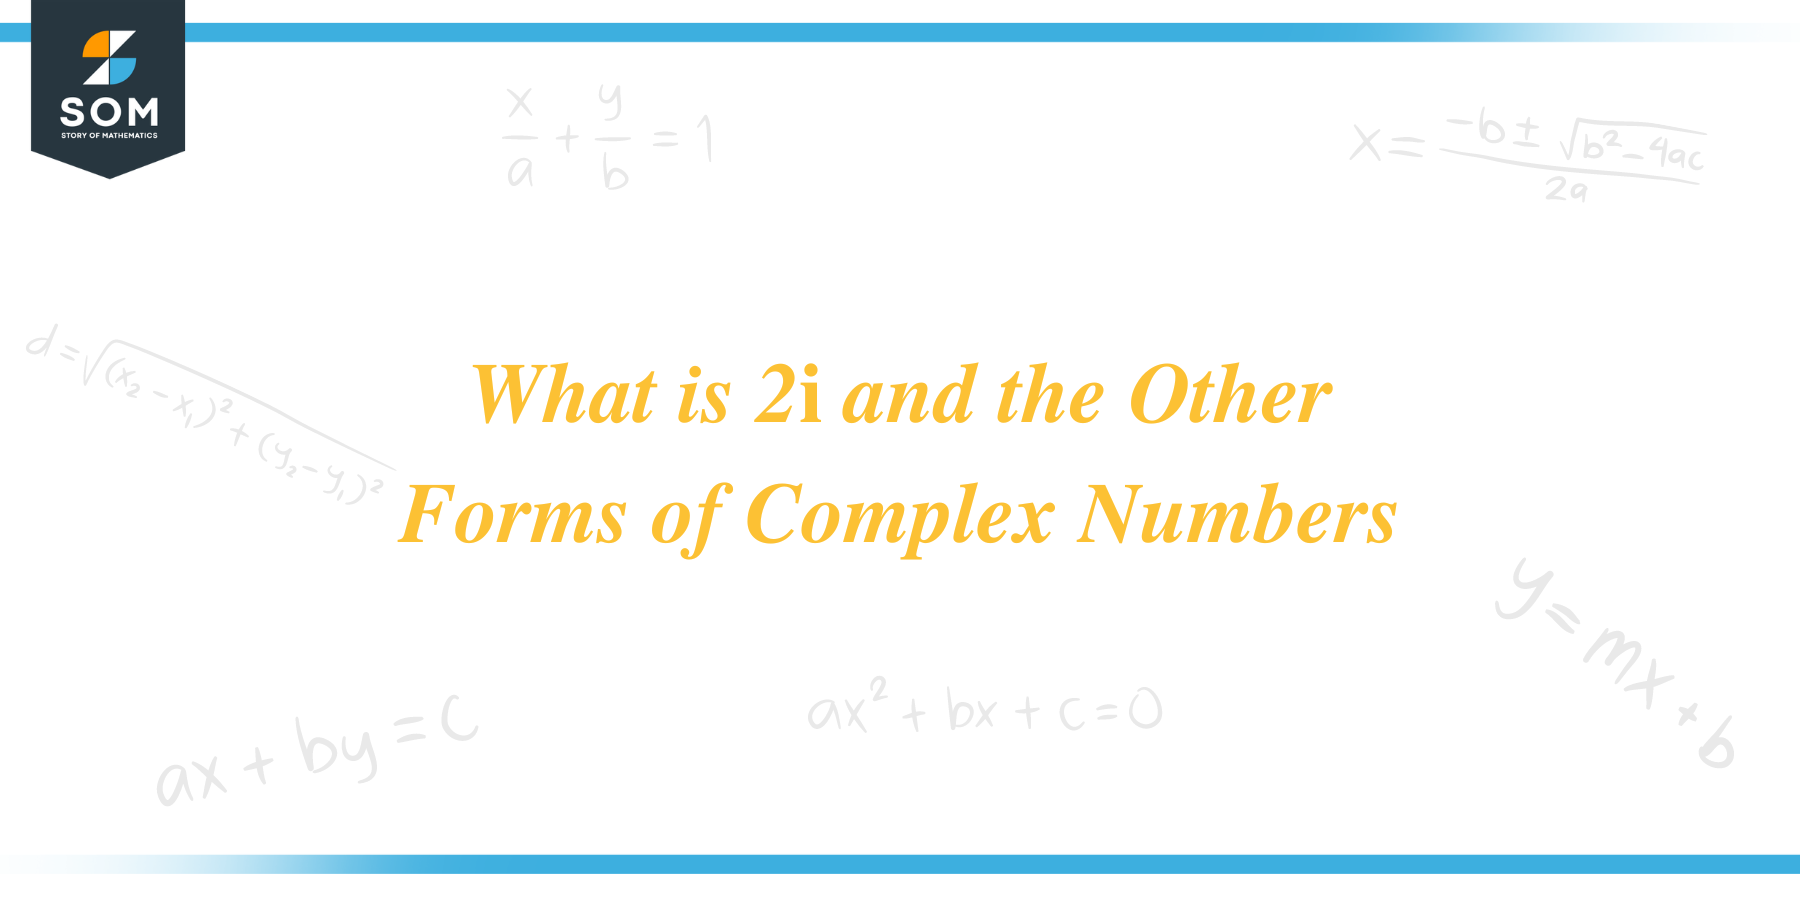 What is 2i and the other forms of complex number title